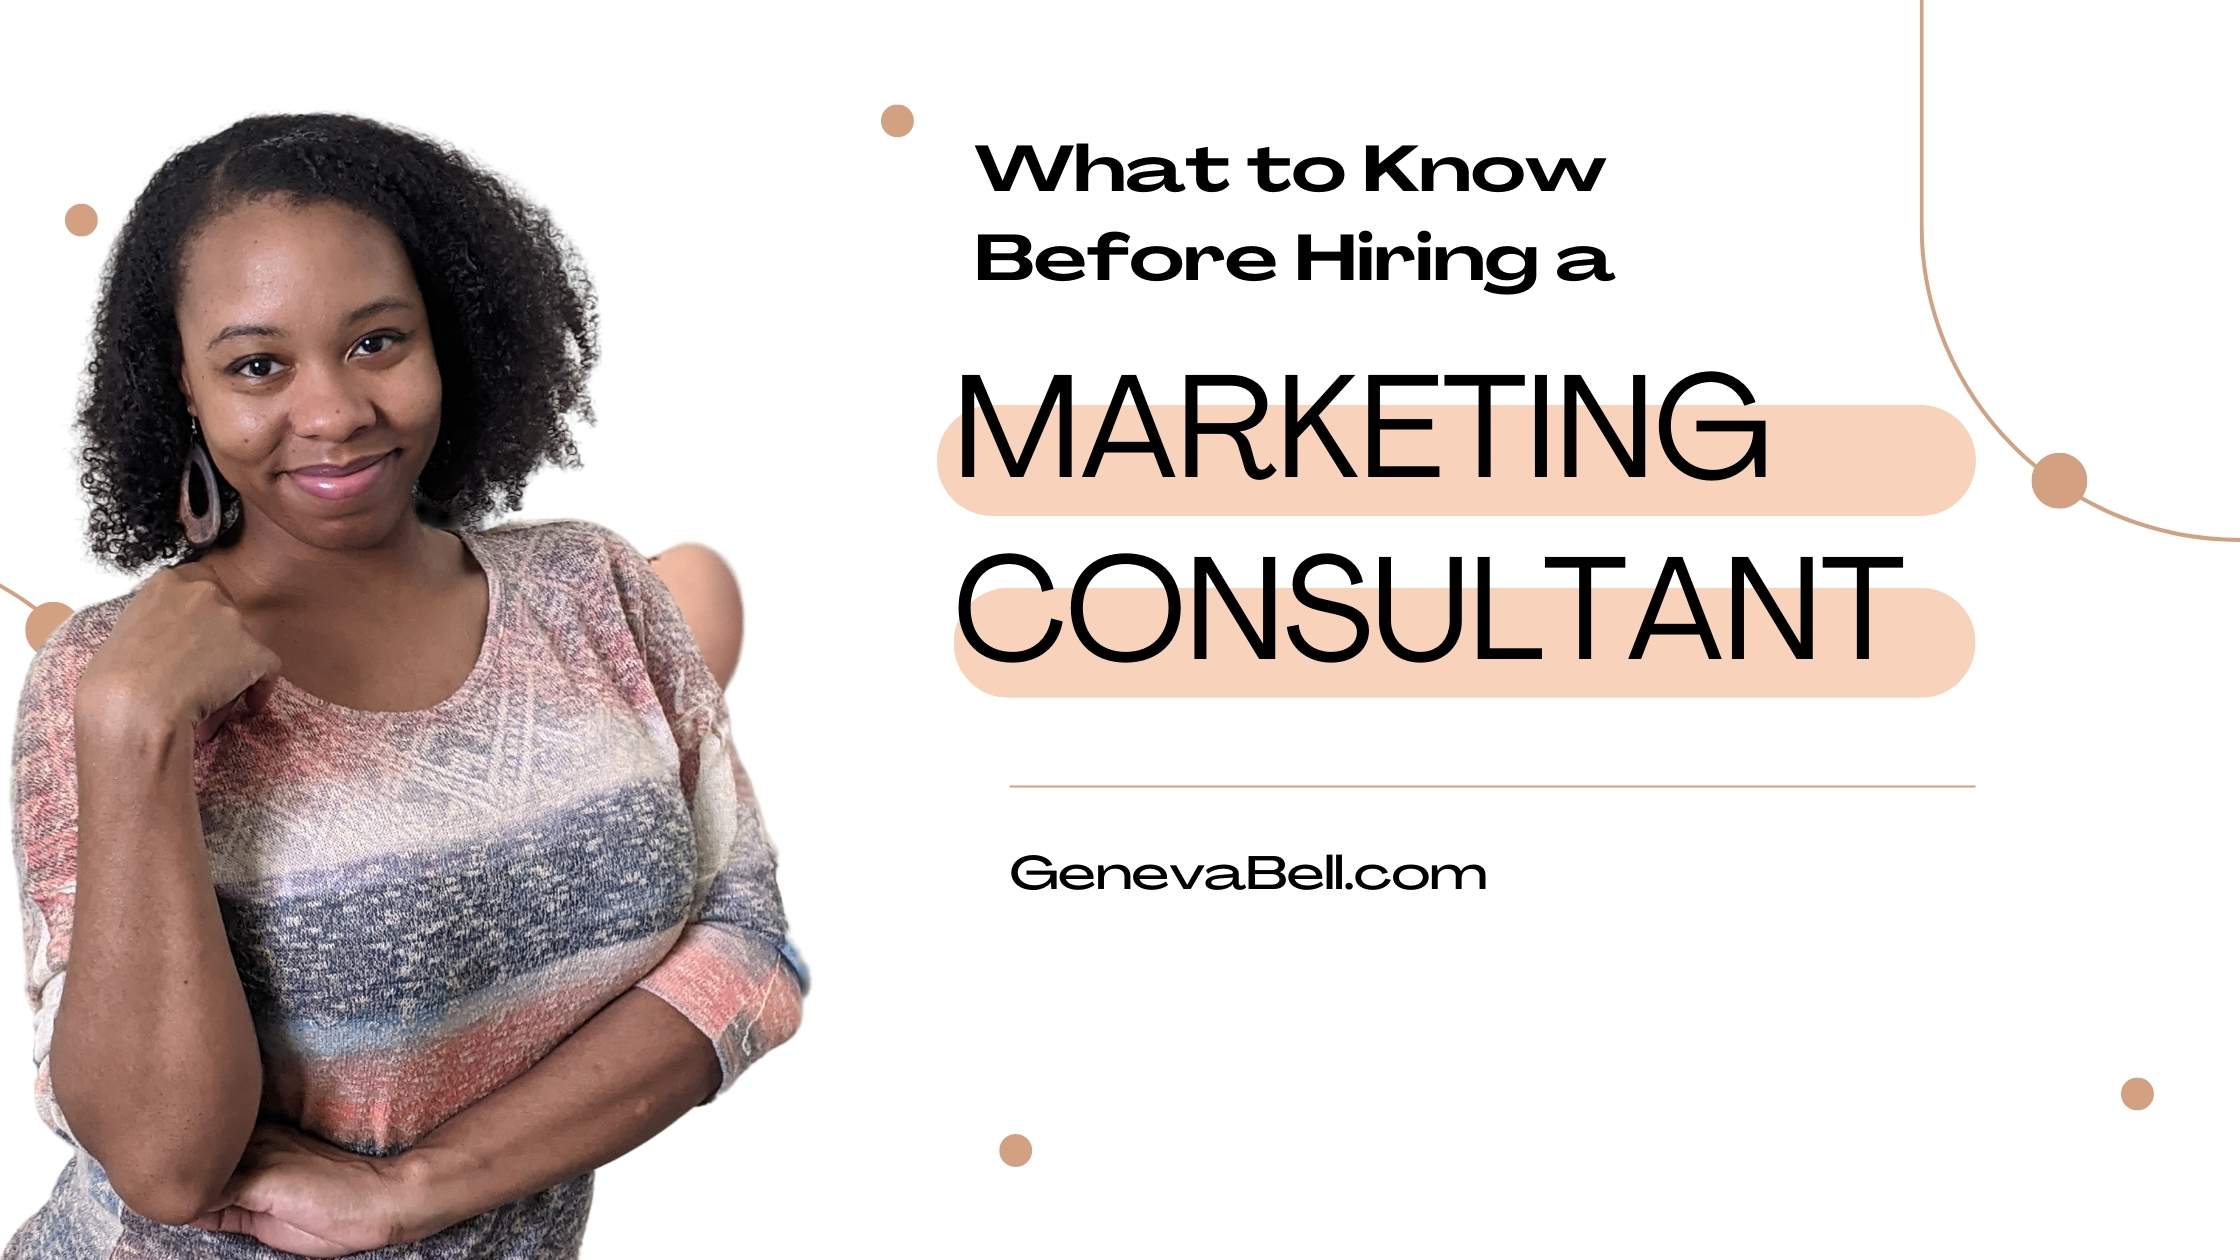 Hiring a Marketing Consultant? (Read This First!)